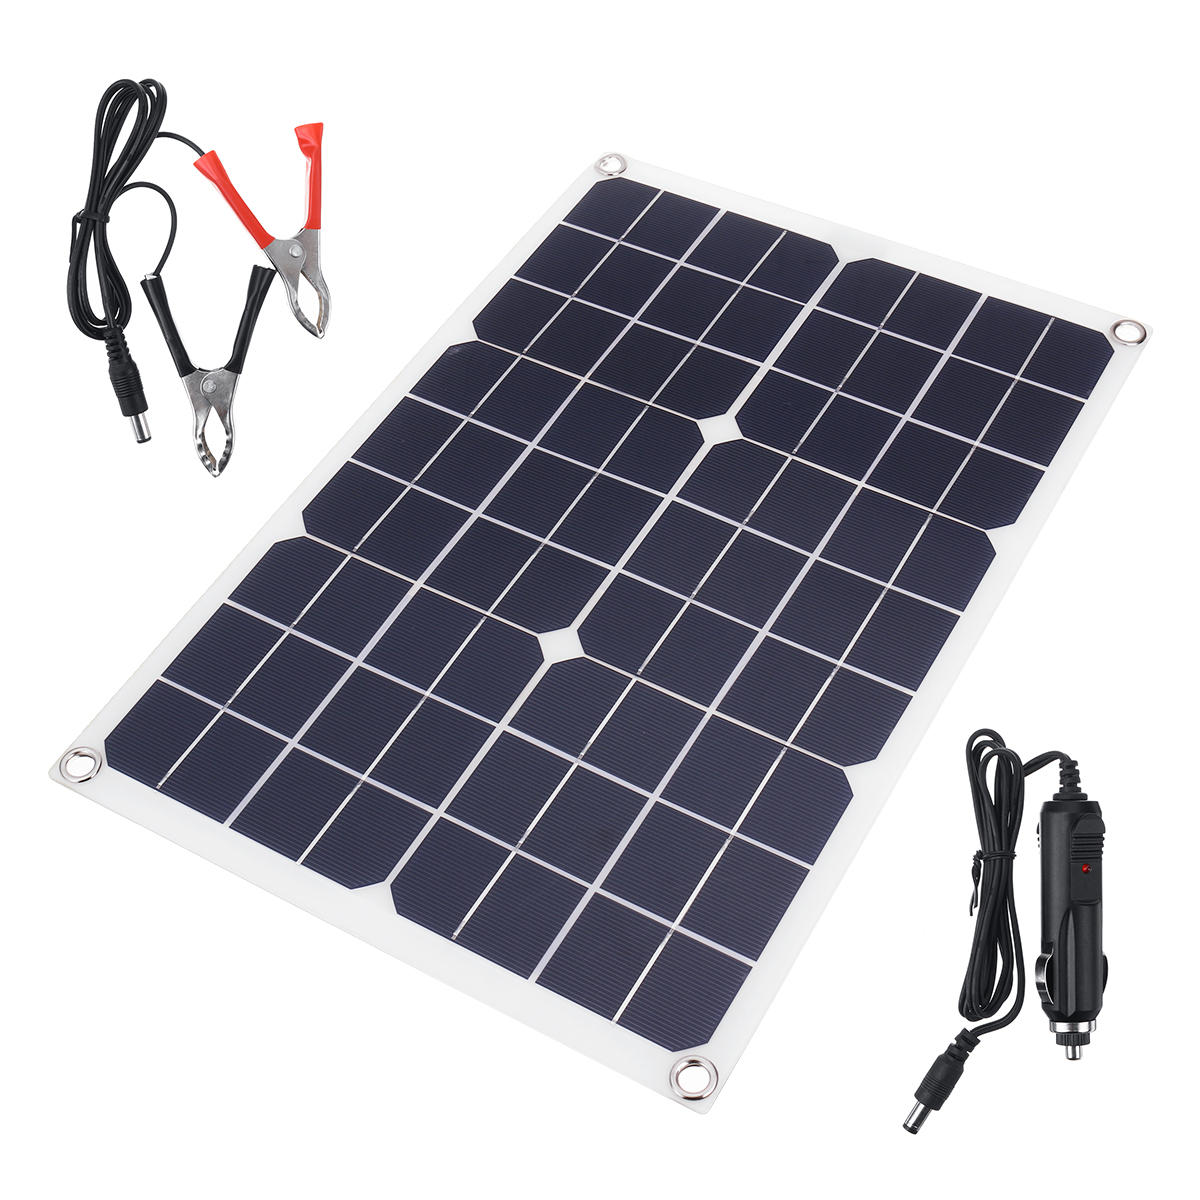 

20W DC5V Monocrystalline Ultra-thin Solar Panel Rear Wiring USB Port with Cable